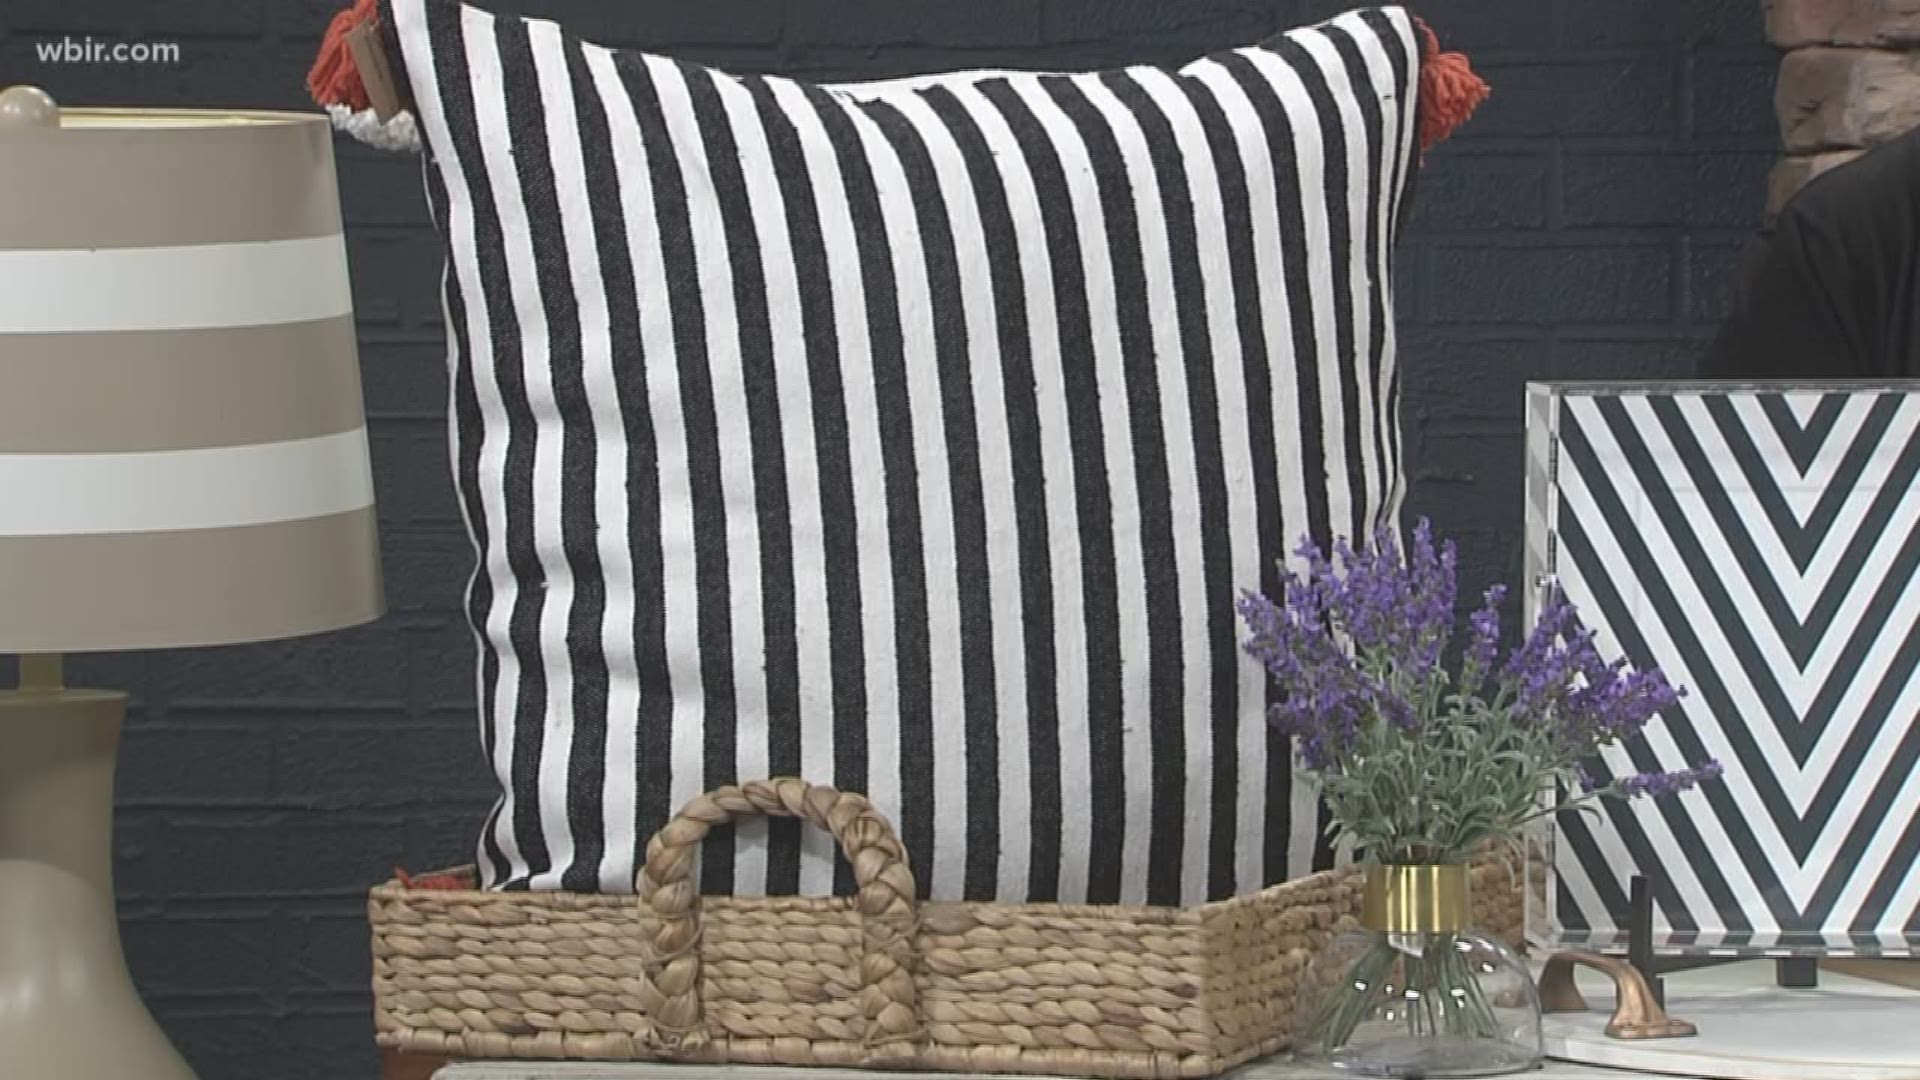 Diana from Bliss Home shows us how to decorate with stripes.